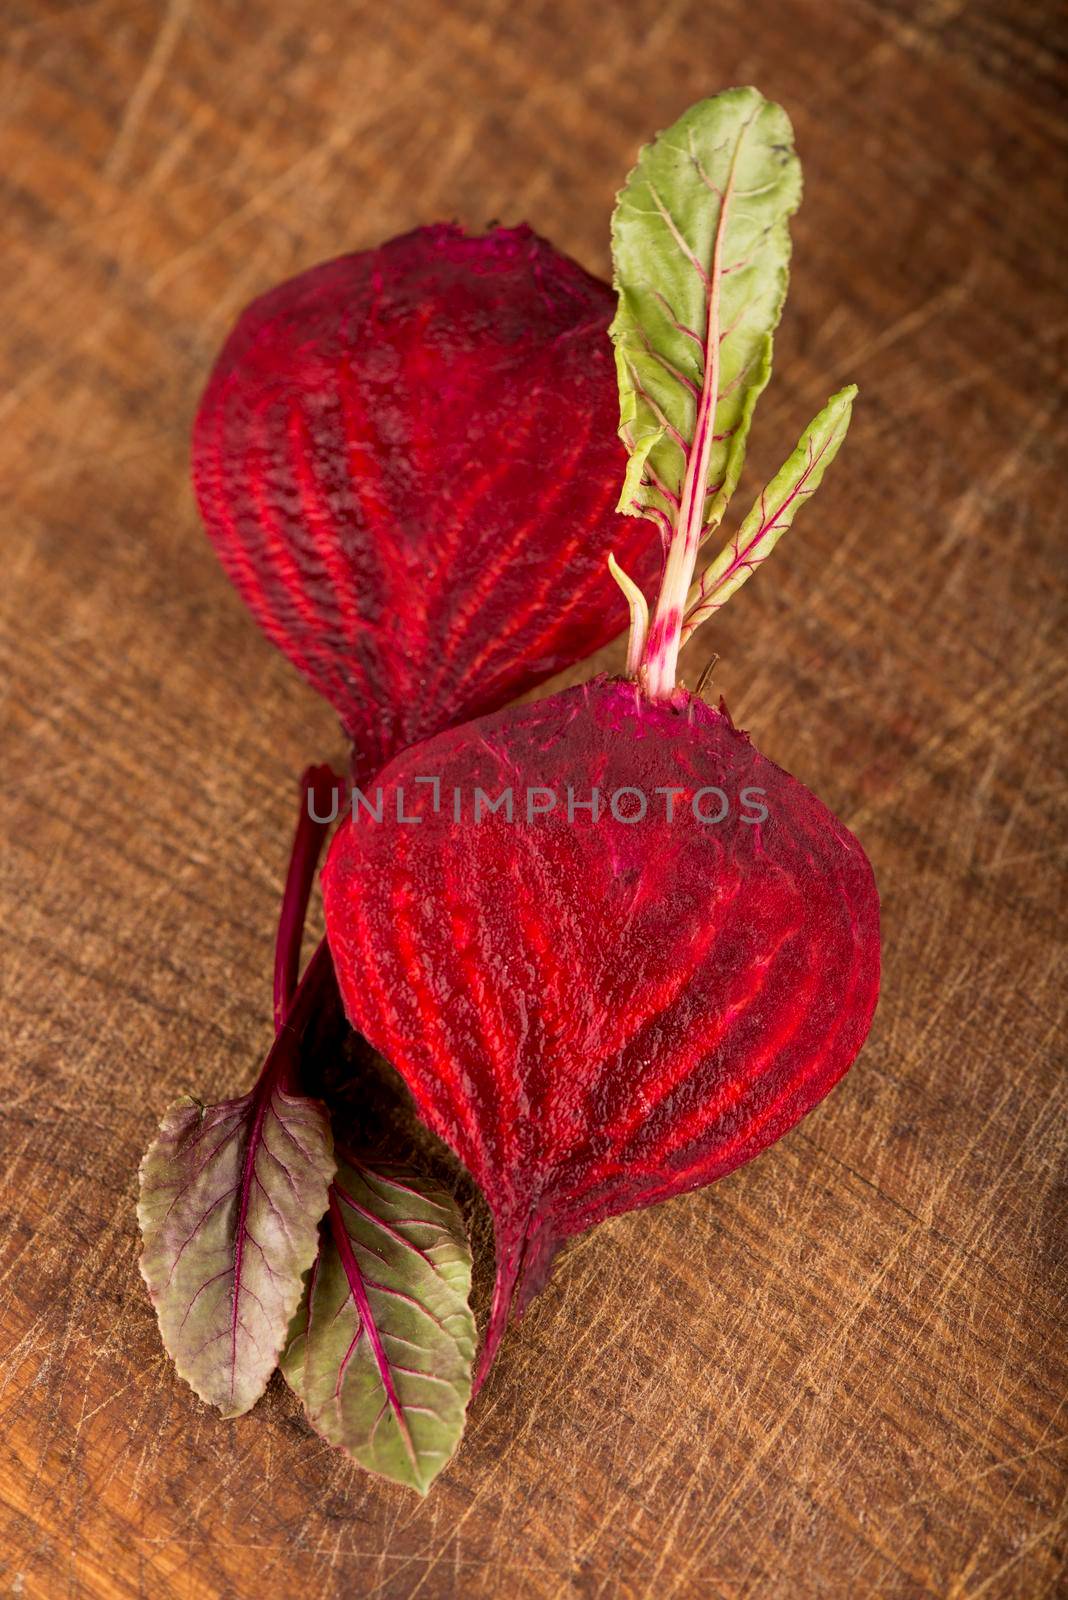 Red beets or beetroot on the wooden by aprilphoto